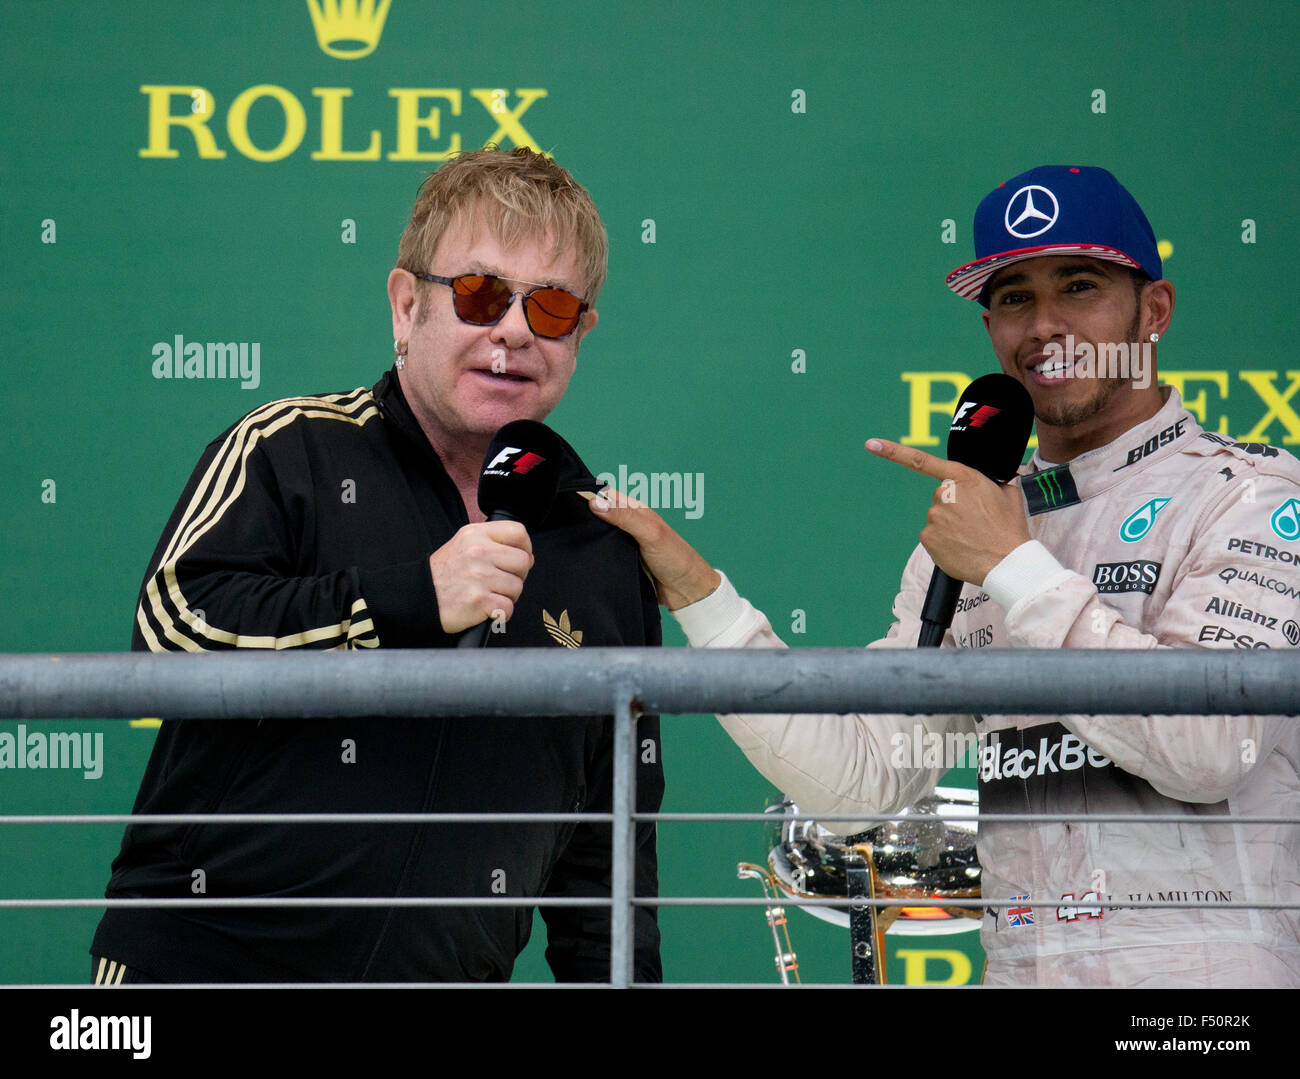 Austin, TX USA October 25, 2015: Formula 1 driver Lewis Hamilton, left talks with Sir Elton John as he celebrates his victory over teammate Nico Rosberg in the United States Grand Prix that clinched his world championship title. Stock Photo